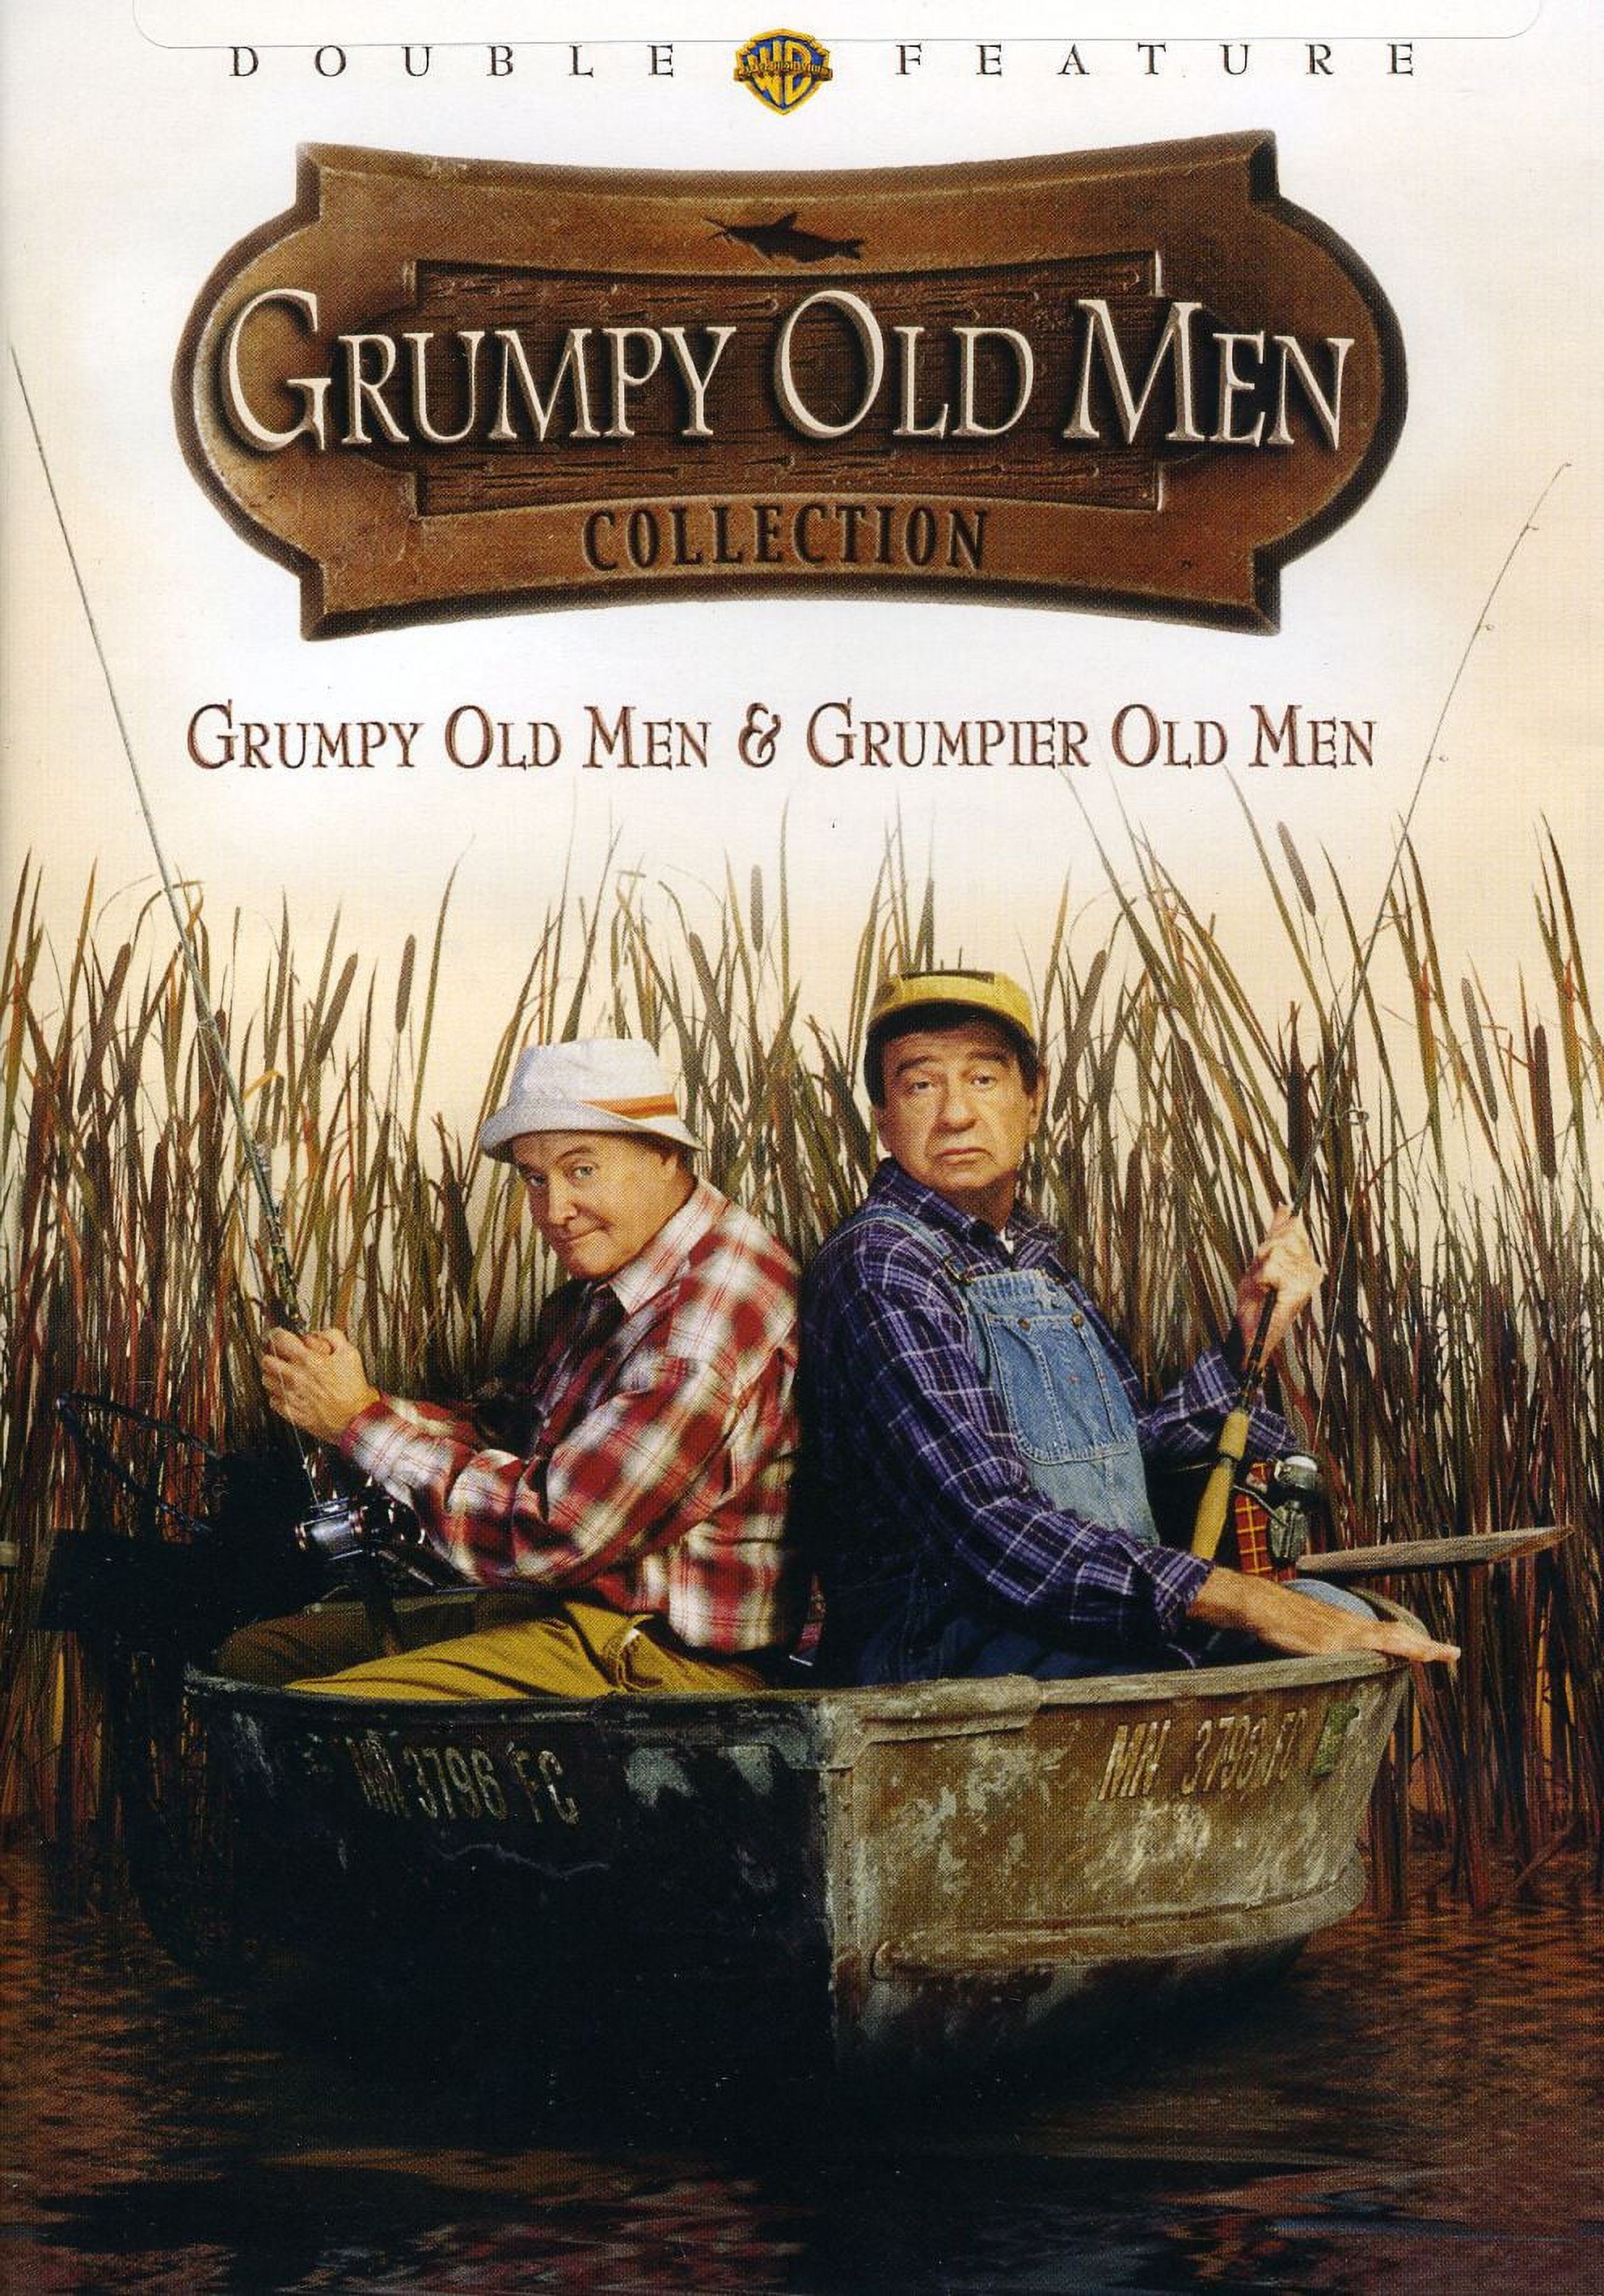 Grumpy Old Men Collection (DVD), Warner Home Video, Comedy - image 5 of 5